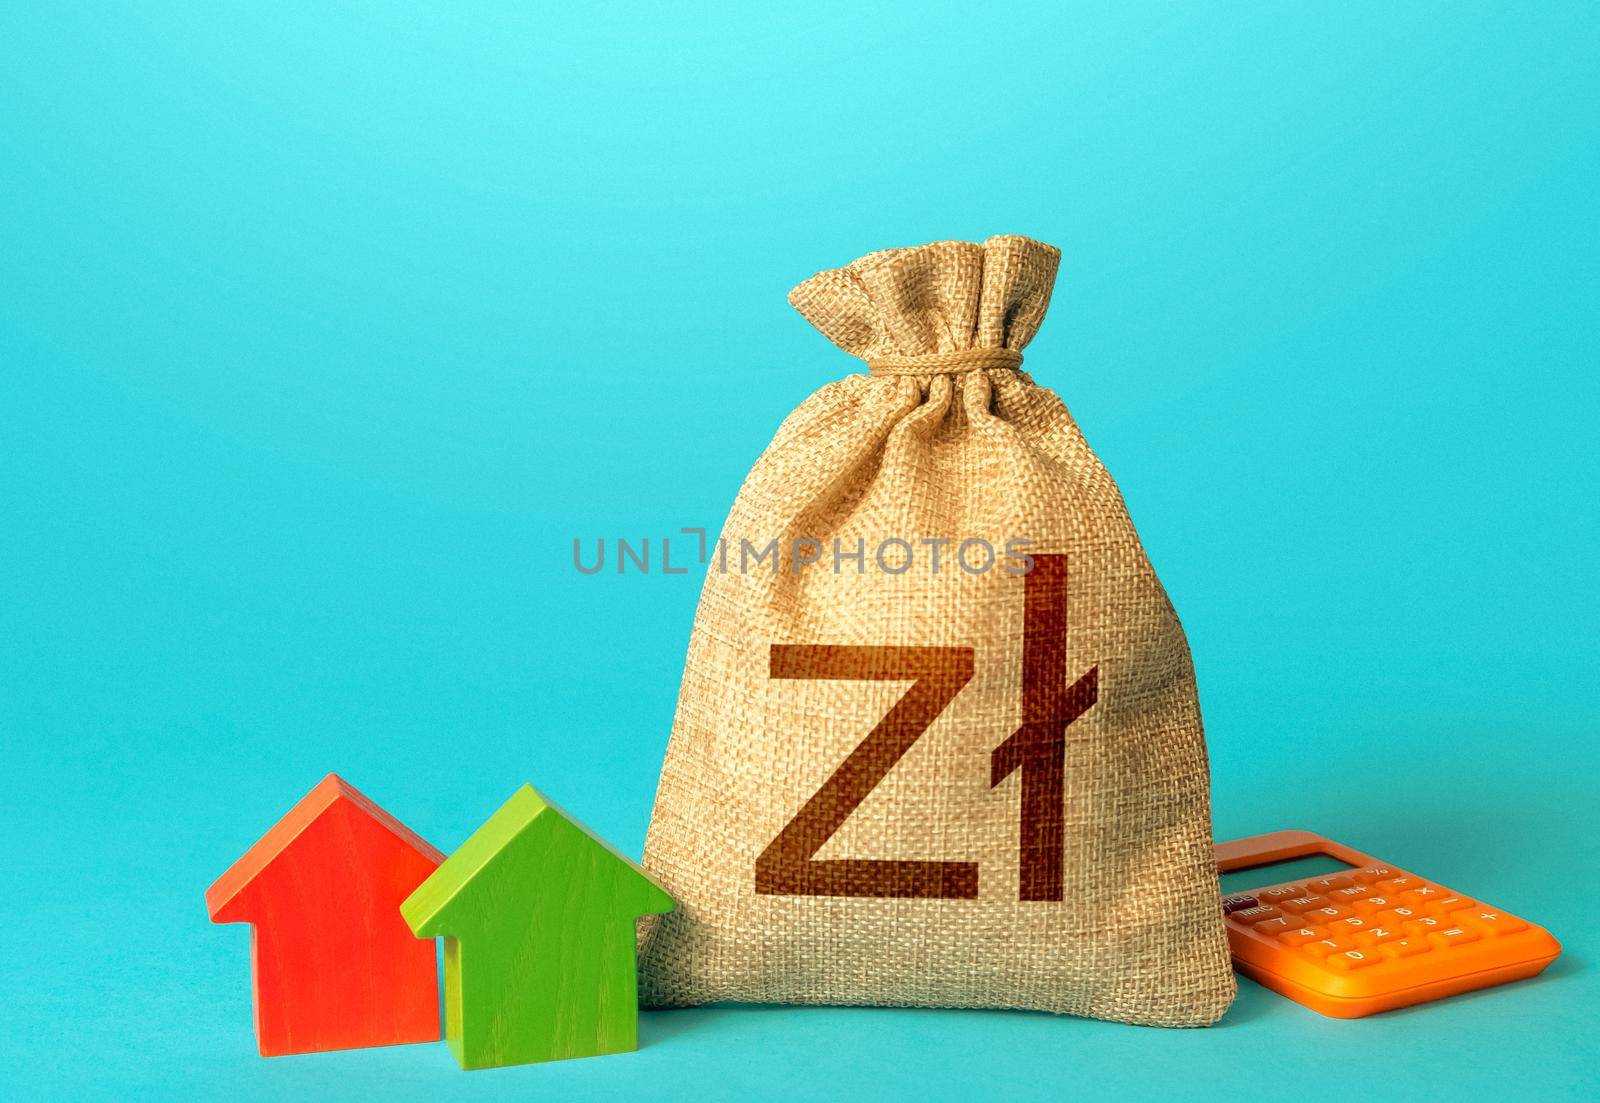 Polish zloty money bag and small houses. Bank offer of mortgage loan. Investments in real estate. Sale of housing. Buy. Rental business. Fair market price. Property appraisal, realtor services.